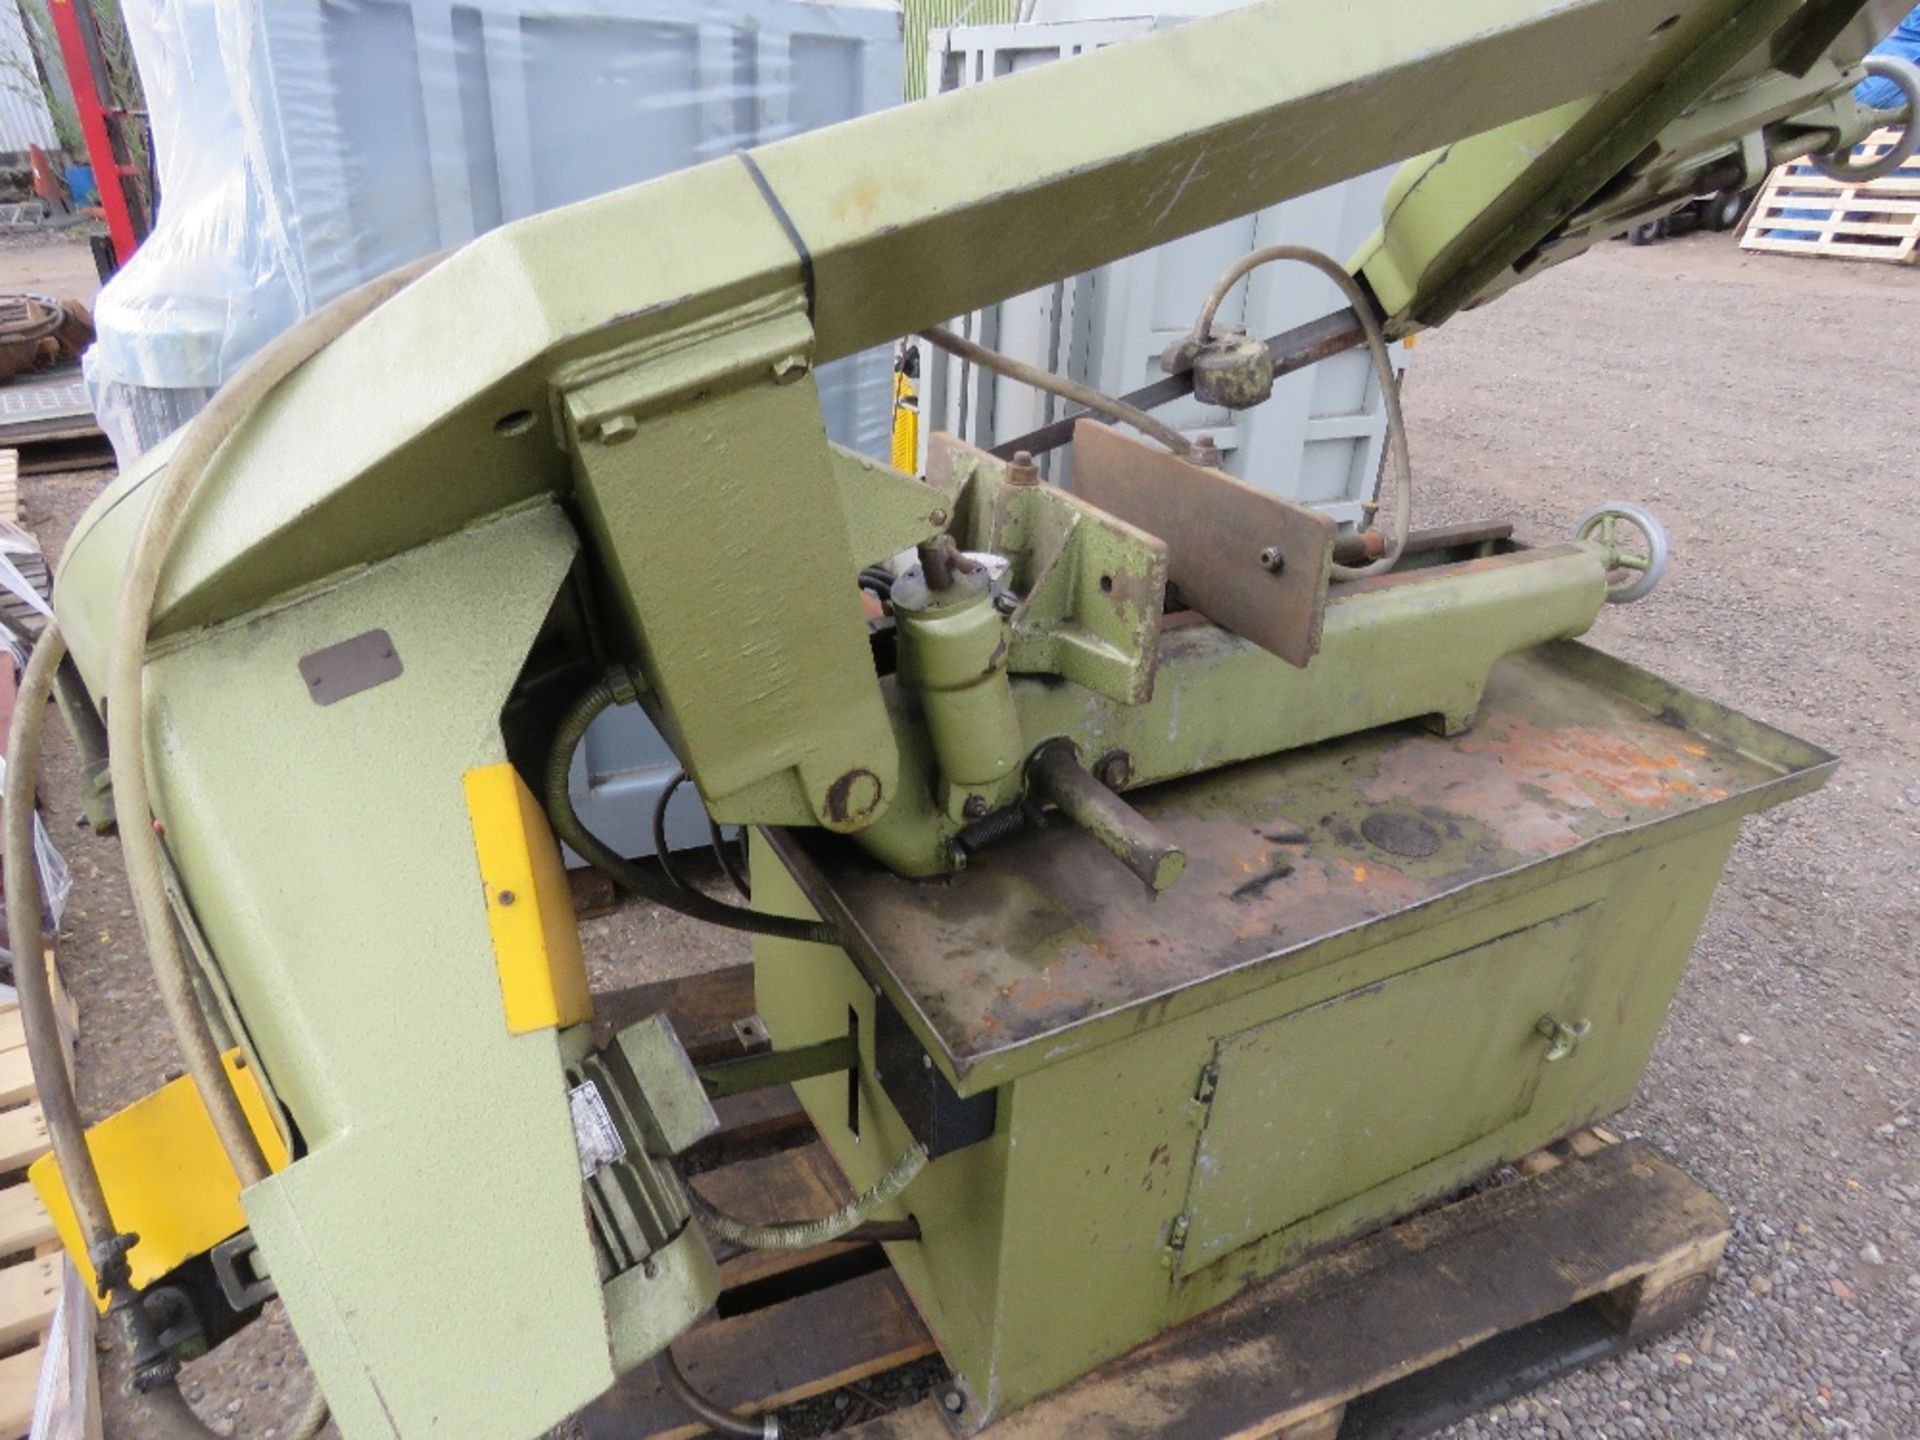 STARTRITE MEBA 3 PHASE METAL CUTTING WORKSHOP BANDSAW. WORKING WHEN REMOVED FROM PREMISES. - Image 6 of 6